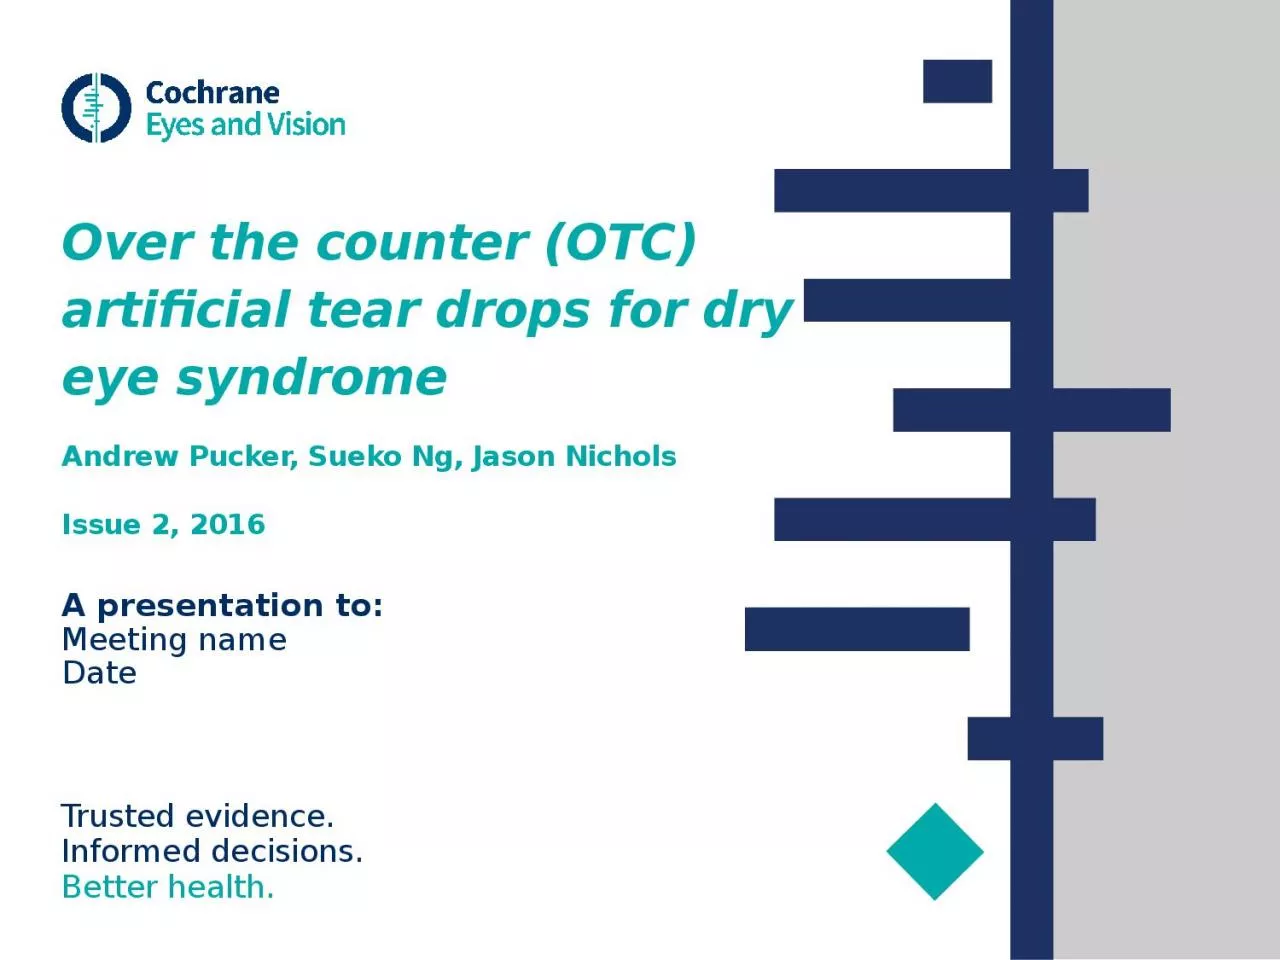 Over the counter (OTC) artificial tear drops for dry eye syndrome